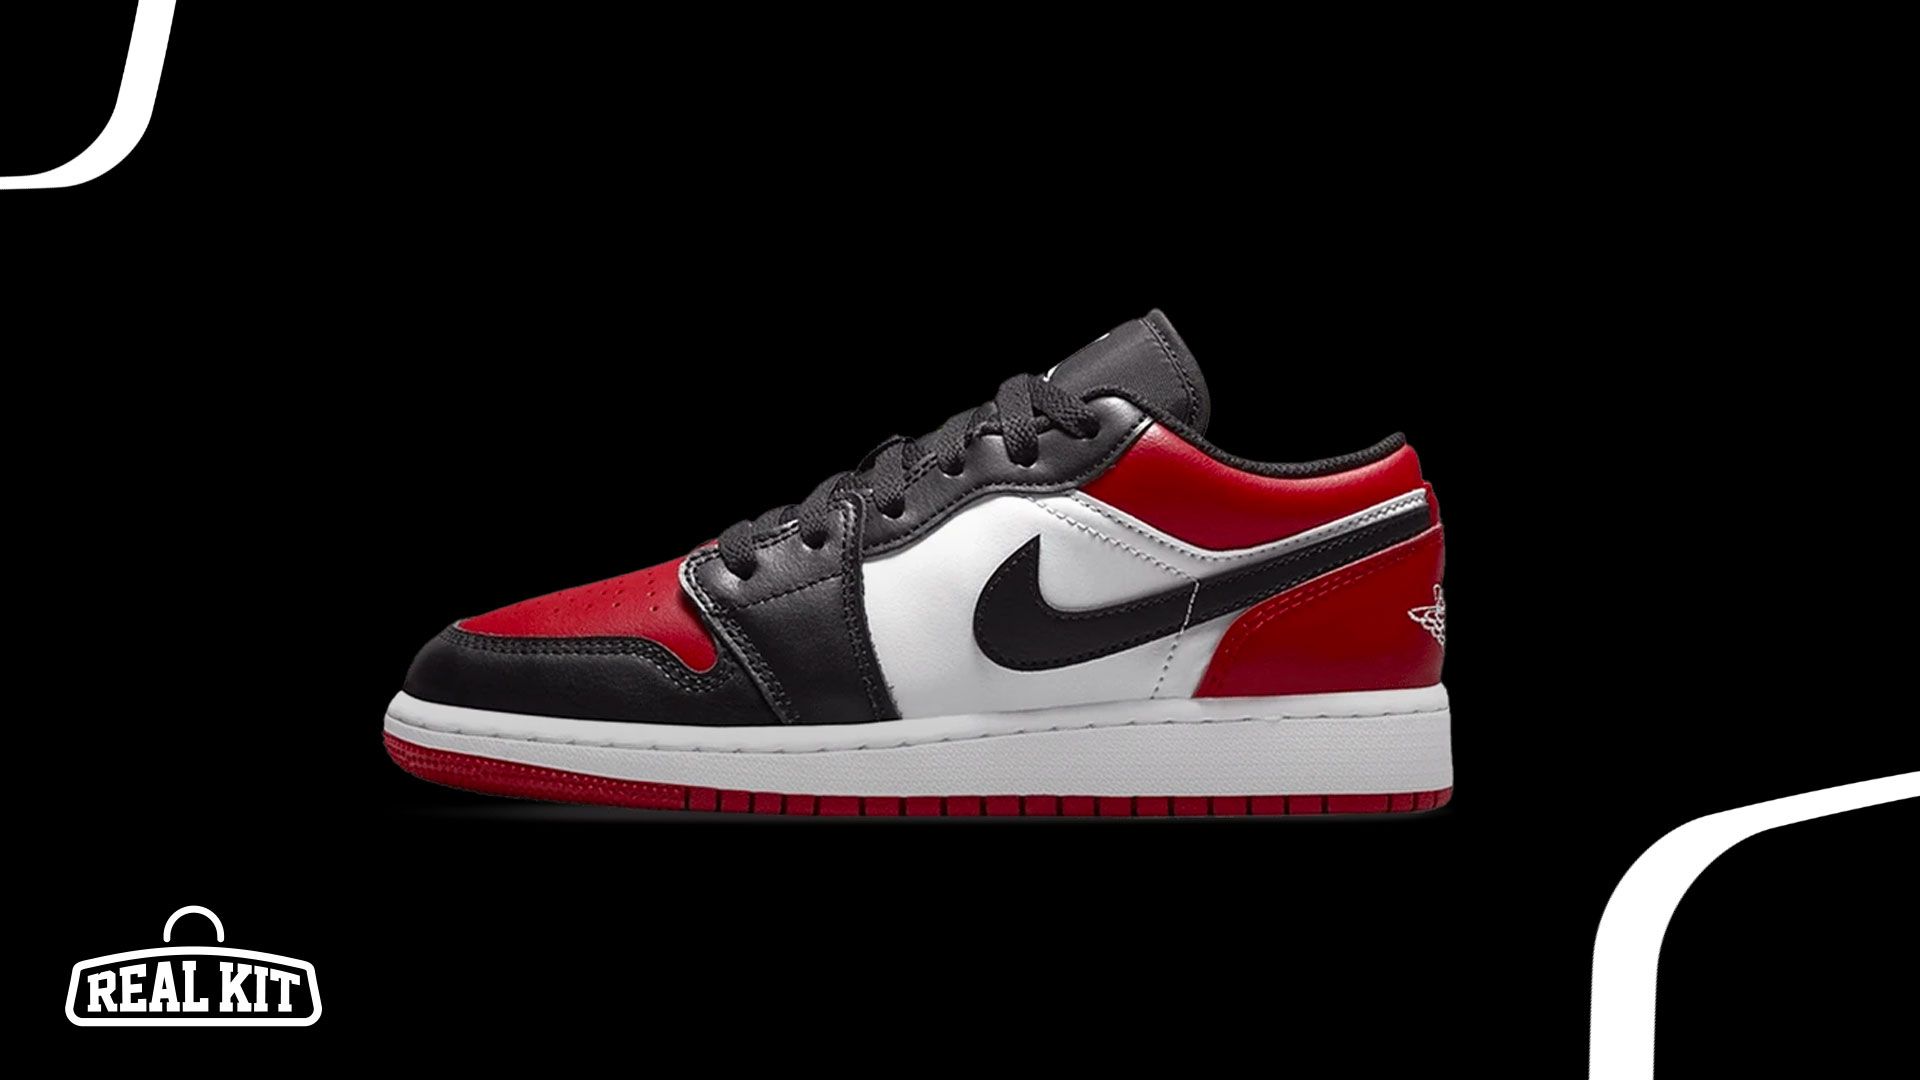 Air Jordan 1 Low Bred Toe OUT NOW: Release Information And 